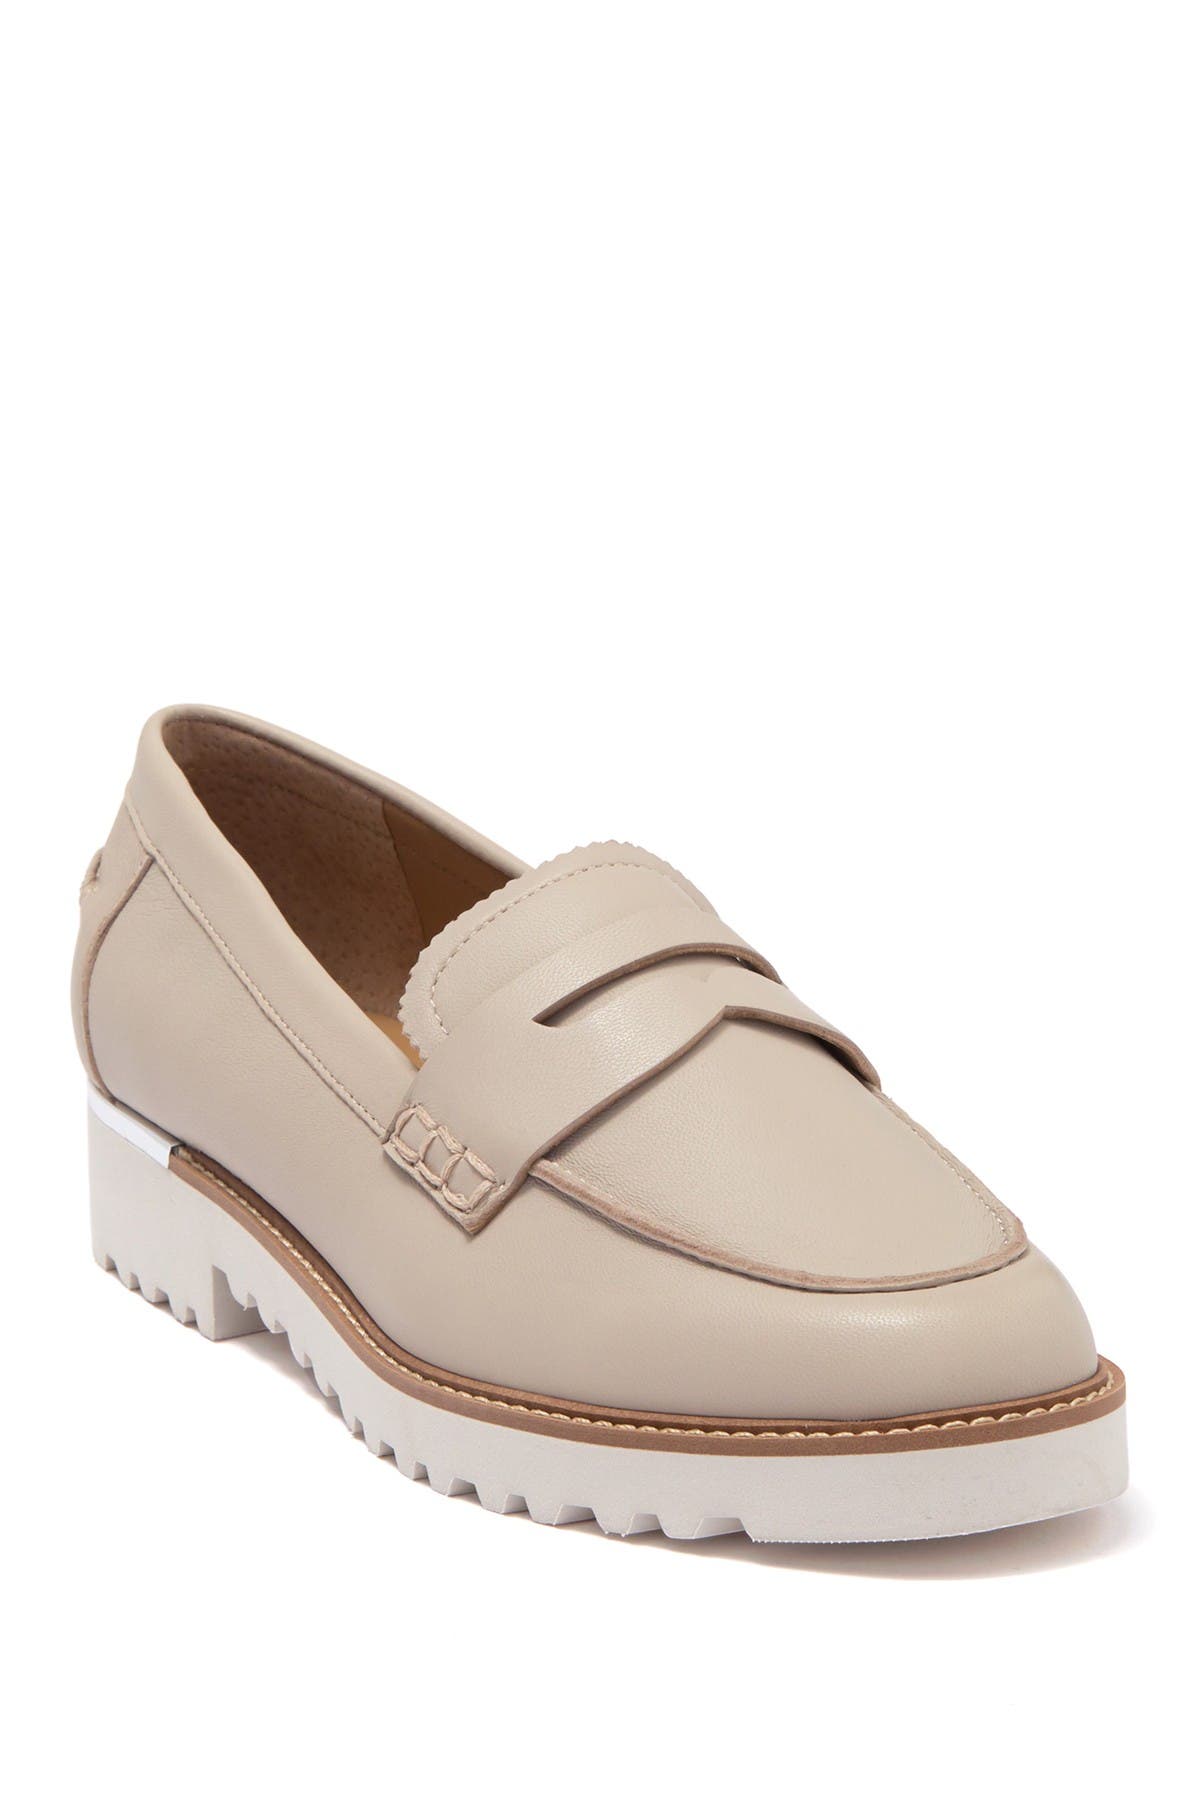 franco sarto shoes loafers